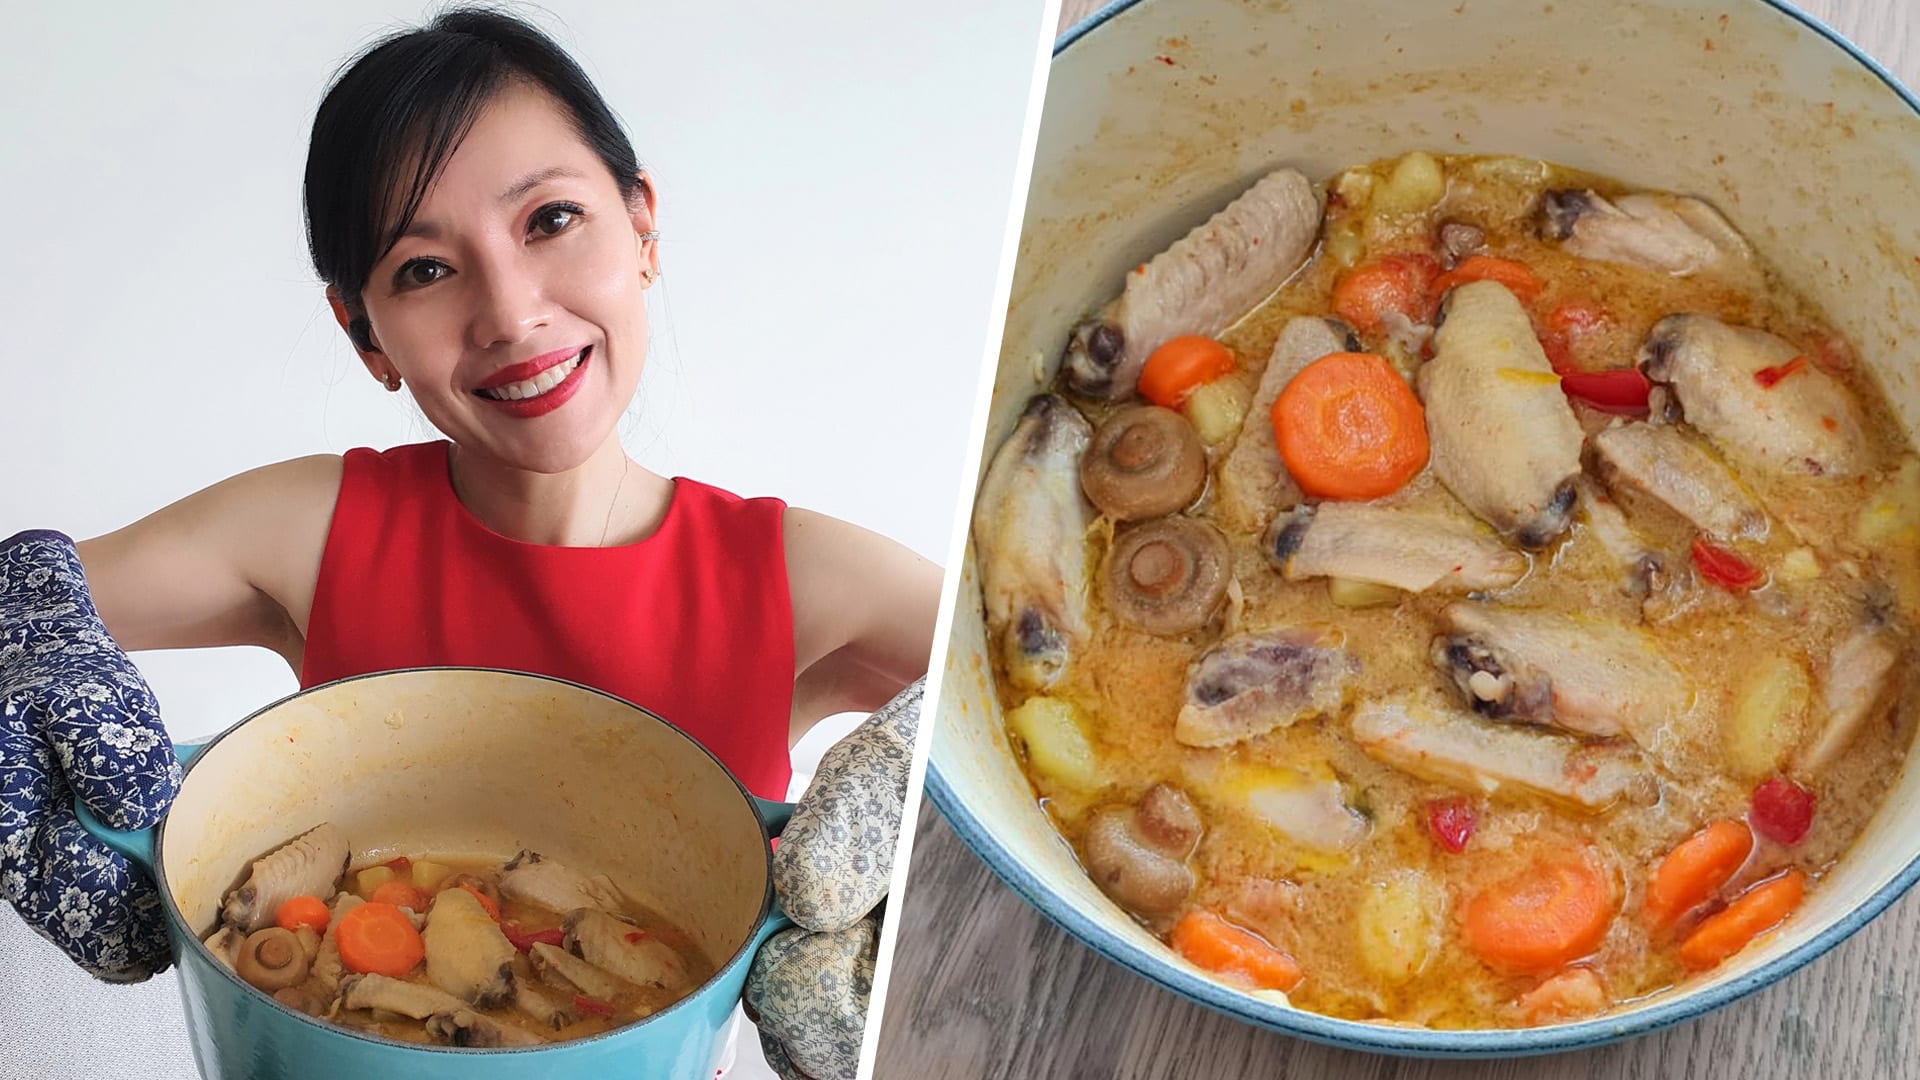 Sharon Au Made French Chicken Stew On Cooking Show & It Was A “Disaster”